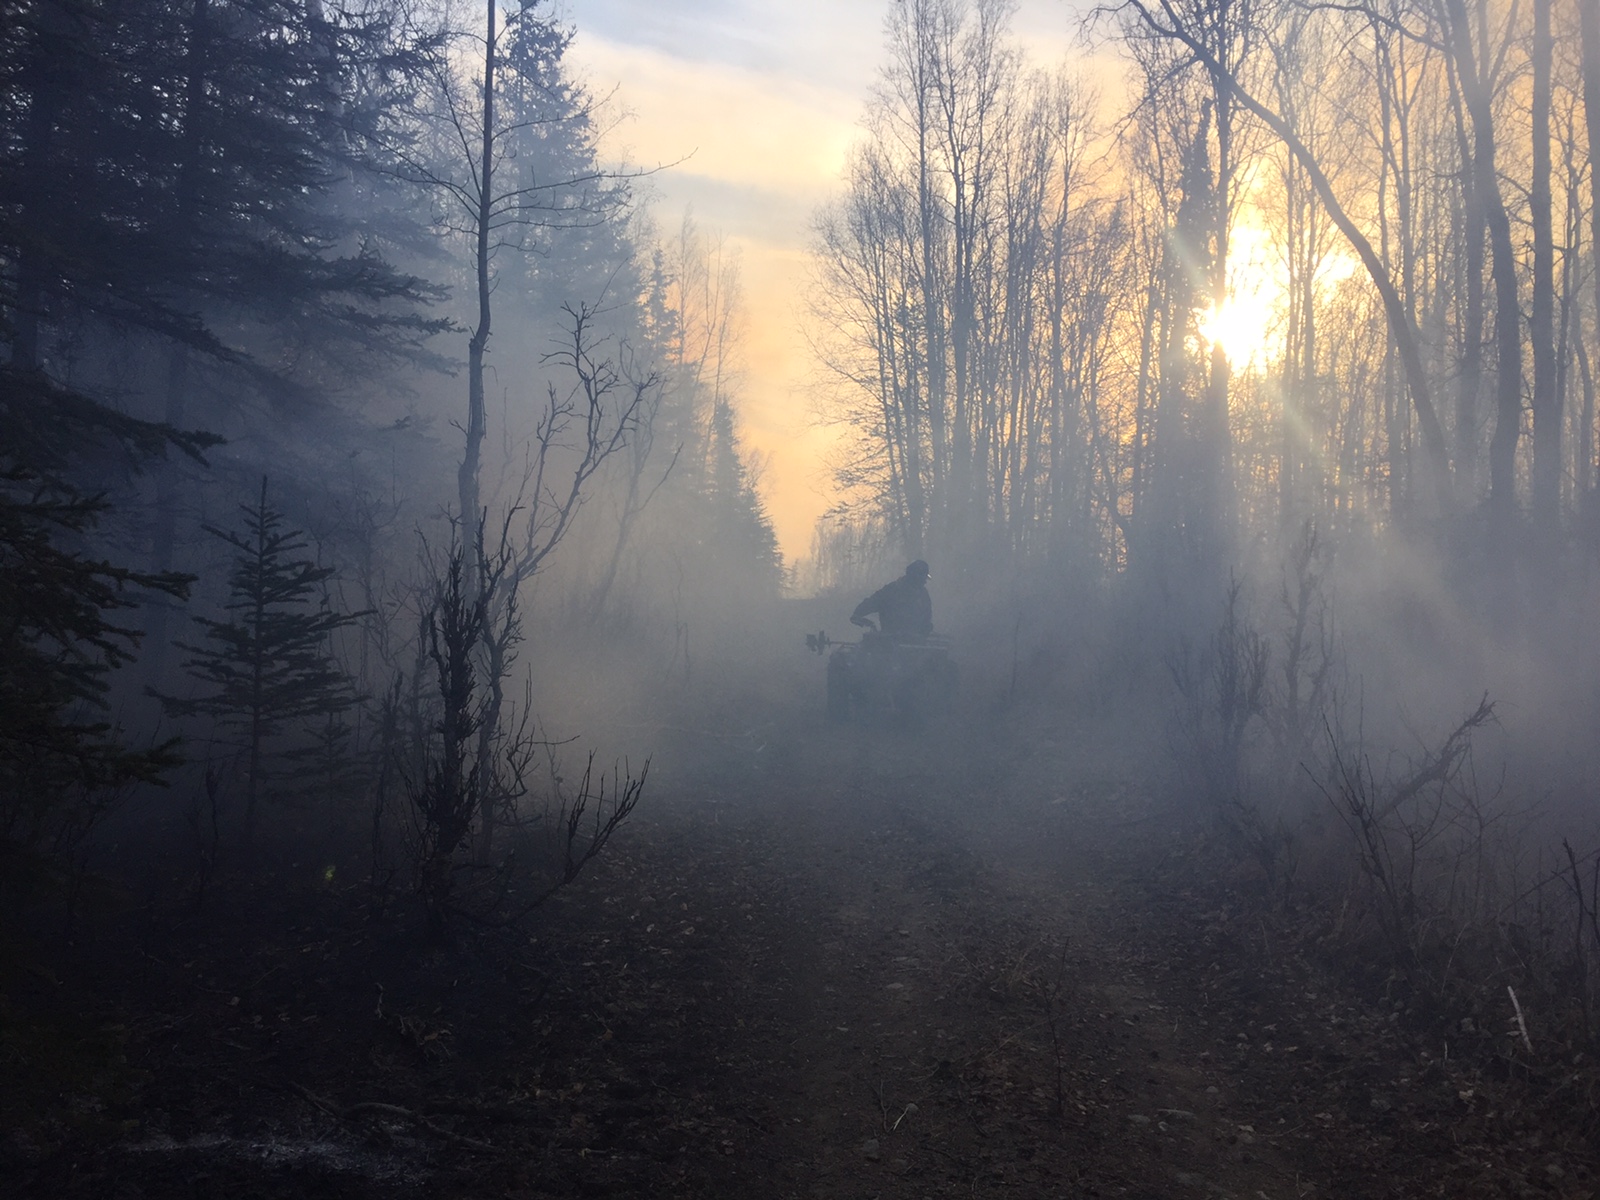 A firefighter on a four-wheeler drives down a trail while patrolling the Moose Creek Fire on Sunday, Oct. 16. (Photo by Sarah Saarloos, Alaska Division of Forestry)